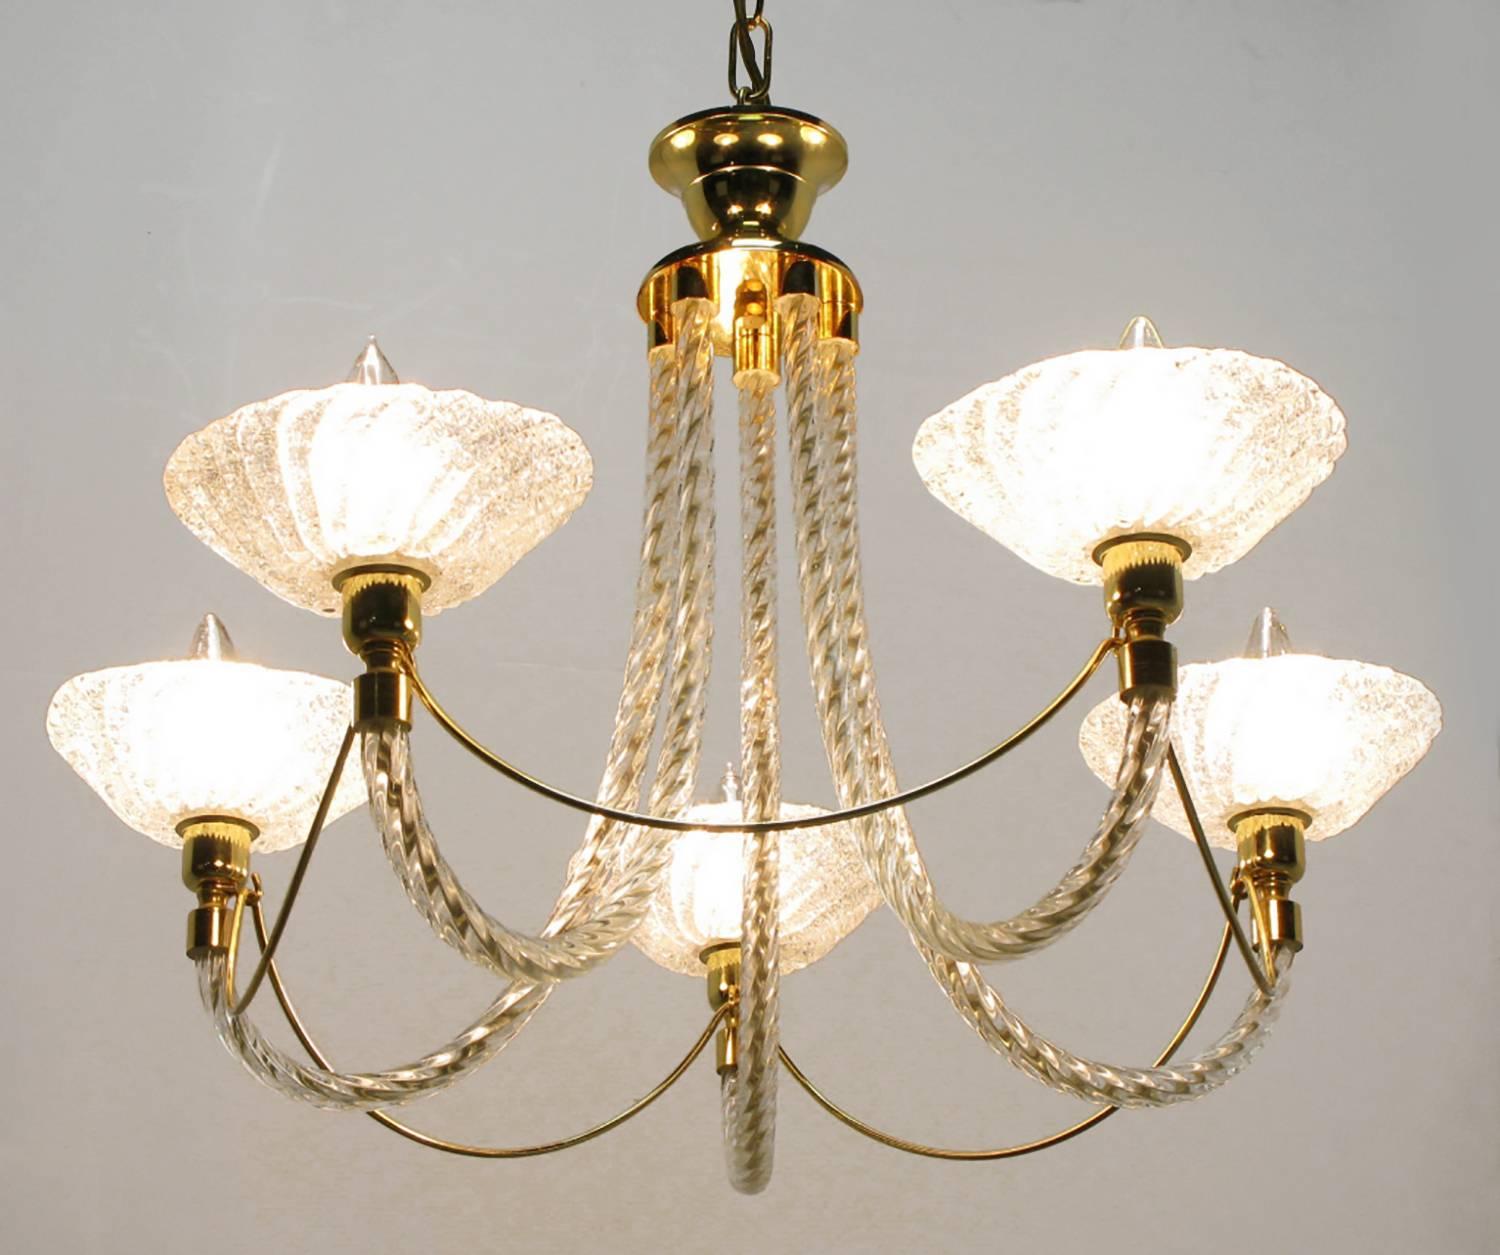 Five-arm handblown Murano glass and brass chandelier in the manner of Barovier & Toso. Roped glass arms with heavily bubbled opaque reeded bobeches. Single stranded brass swag between each arm.